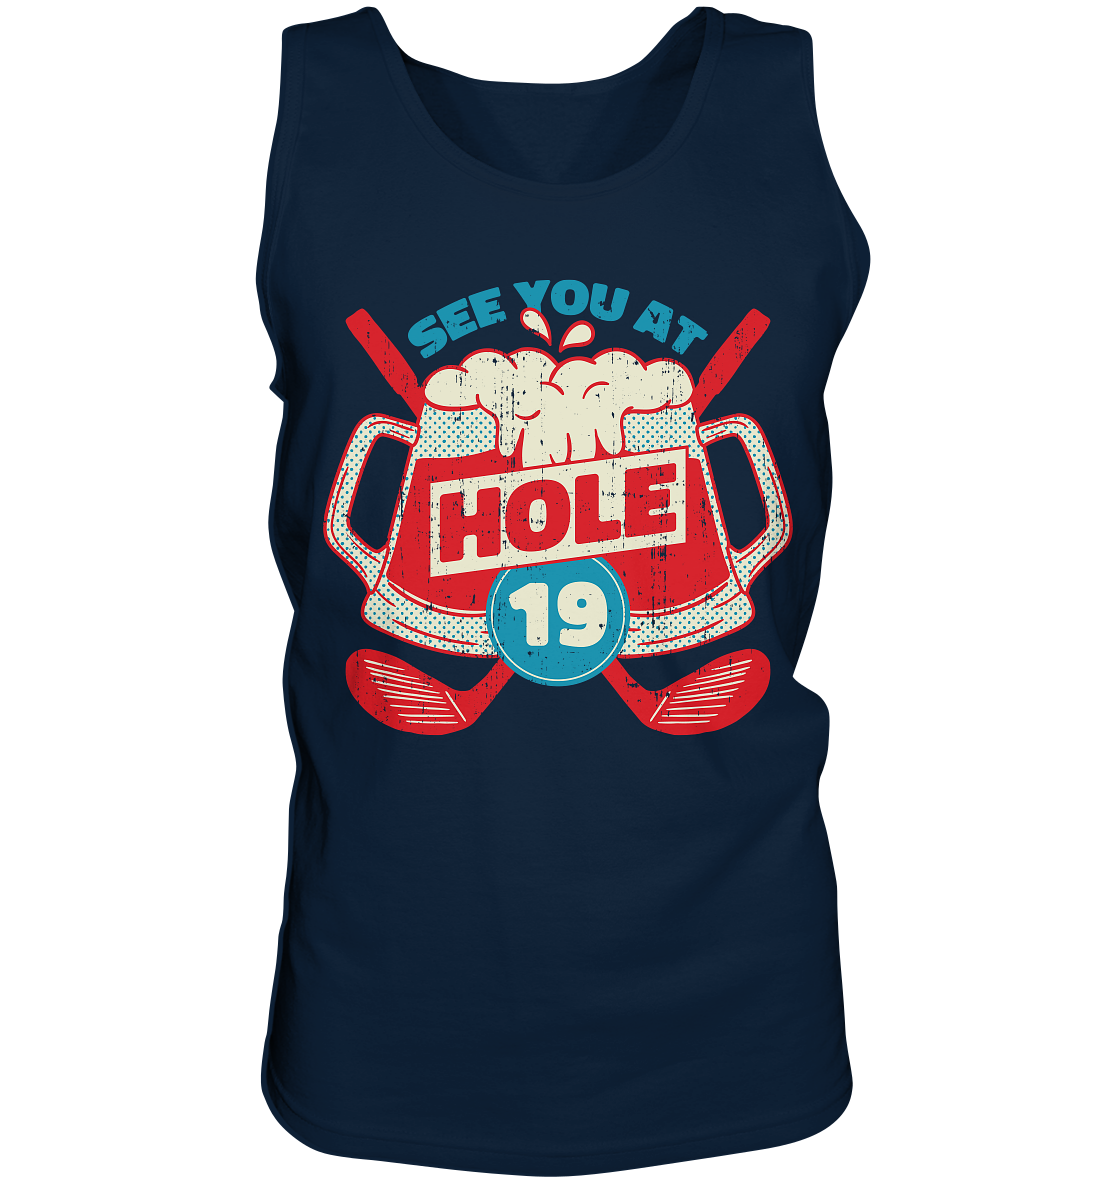 Golf ,See you at Hole 19 , Wir sehen uns bei Loch 19 - Tank-Top